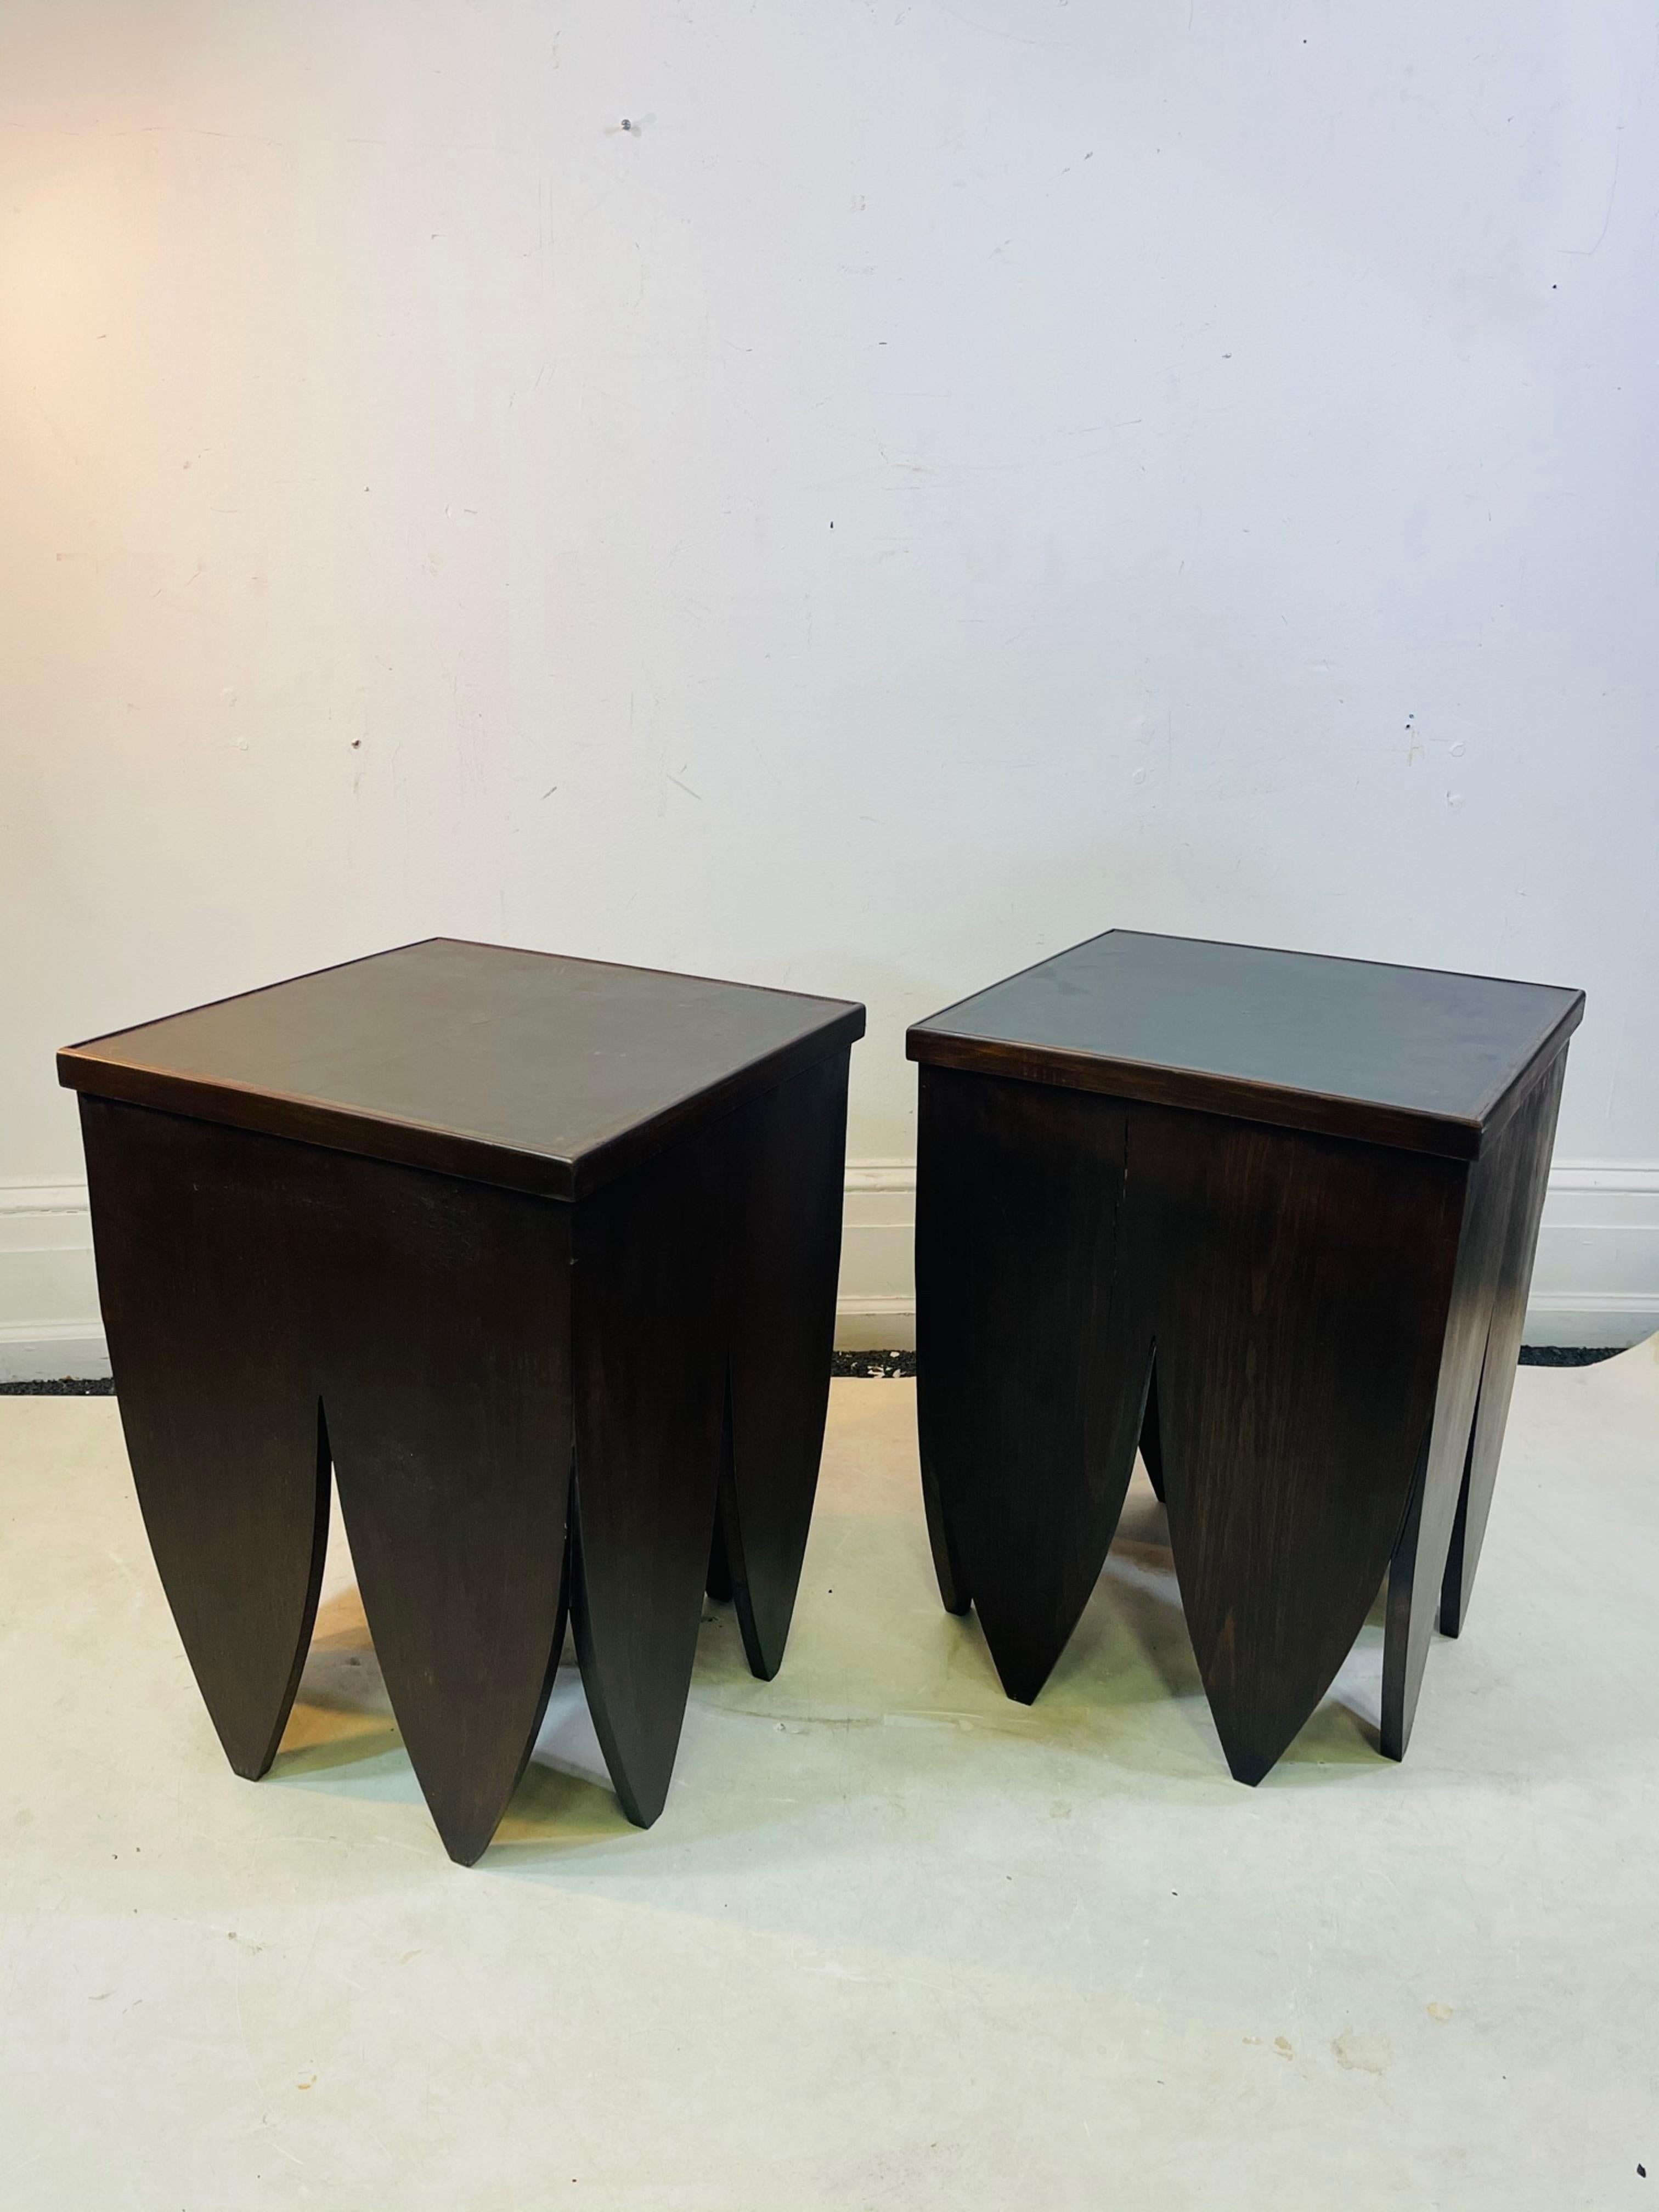 Art Deco style pair of end tables in wood with square tooled leather tops. In great vintage condition with age-appropriate wear and use.